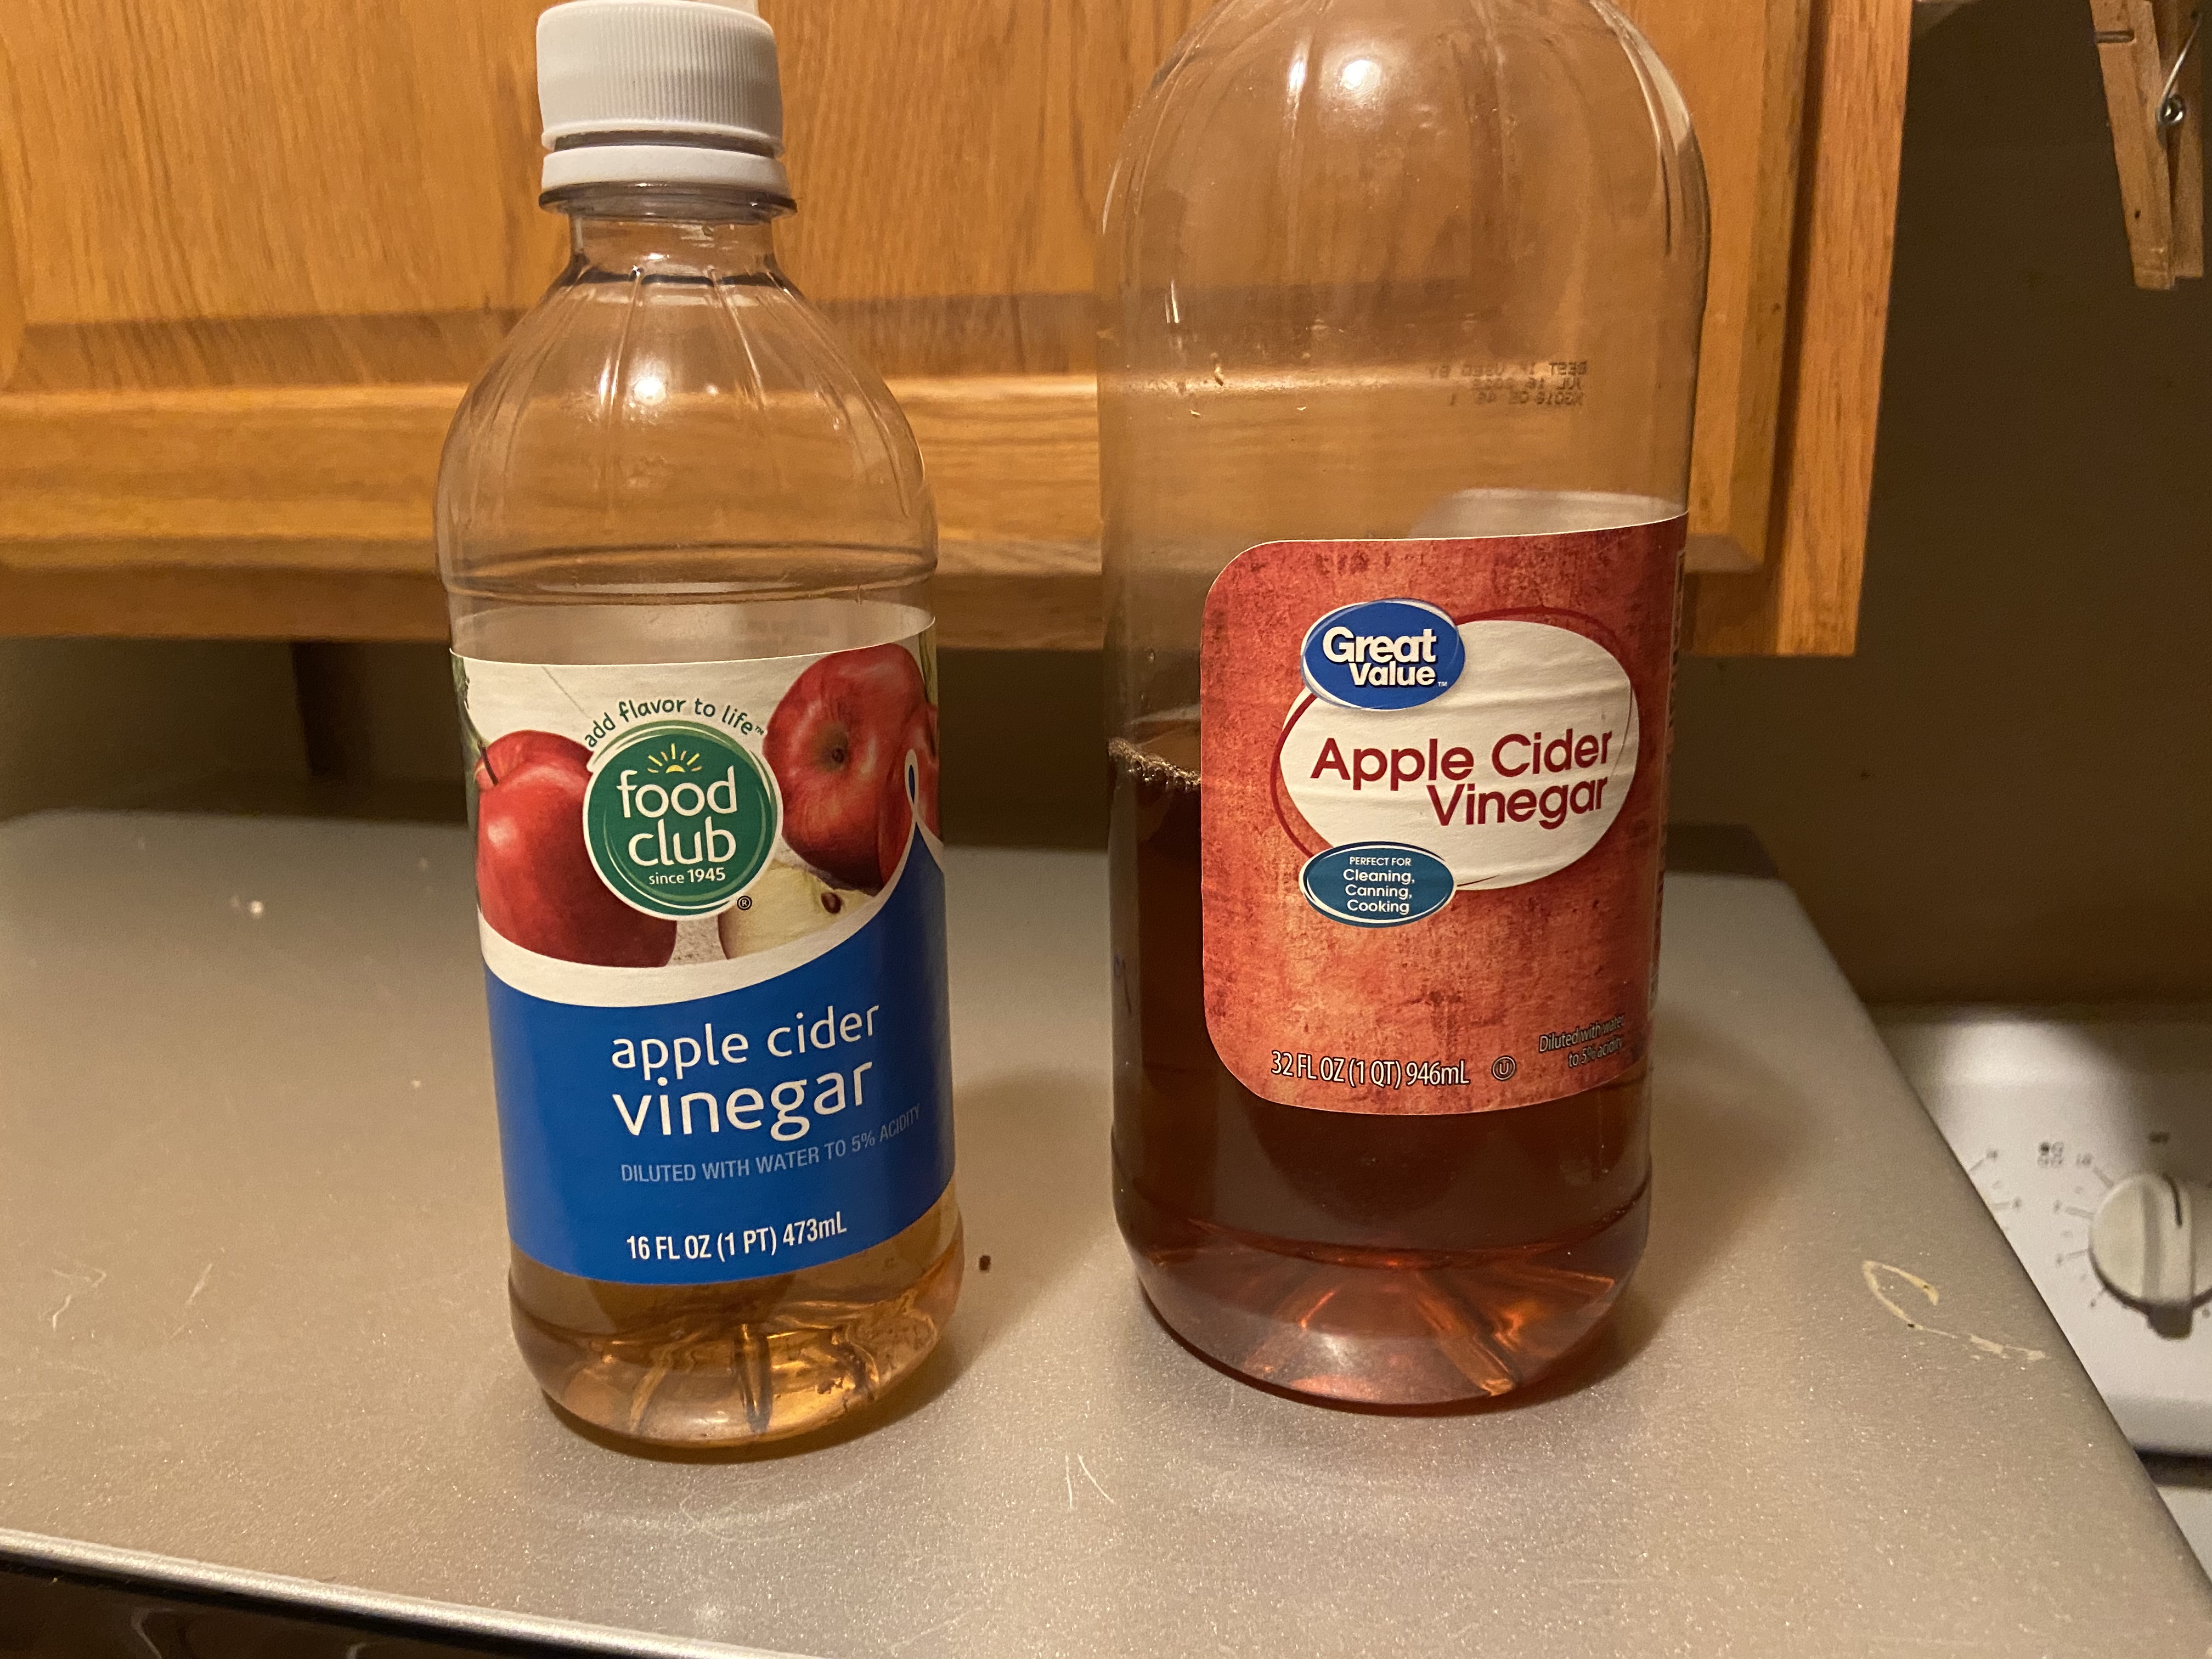 Two bottles of Apple Cidar Vinegar. Both are roughtly 1/2 full. One is slightly larger than the other.